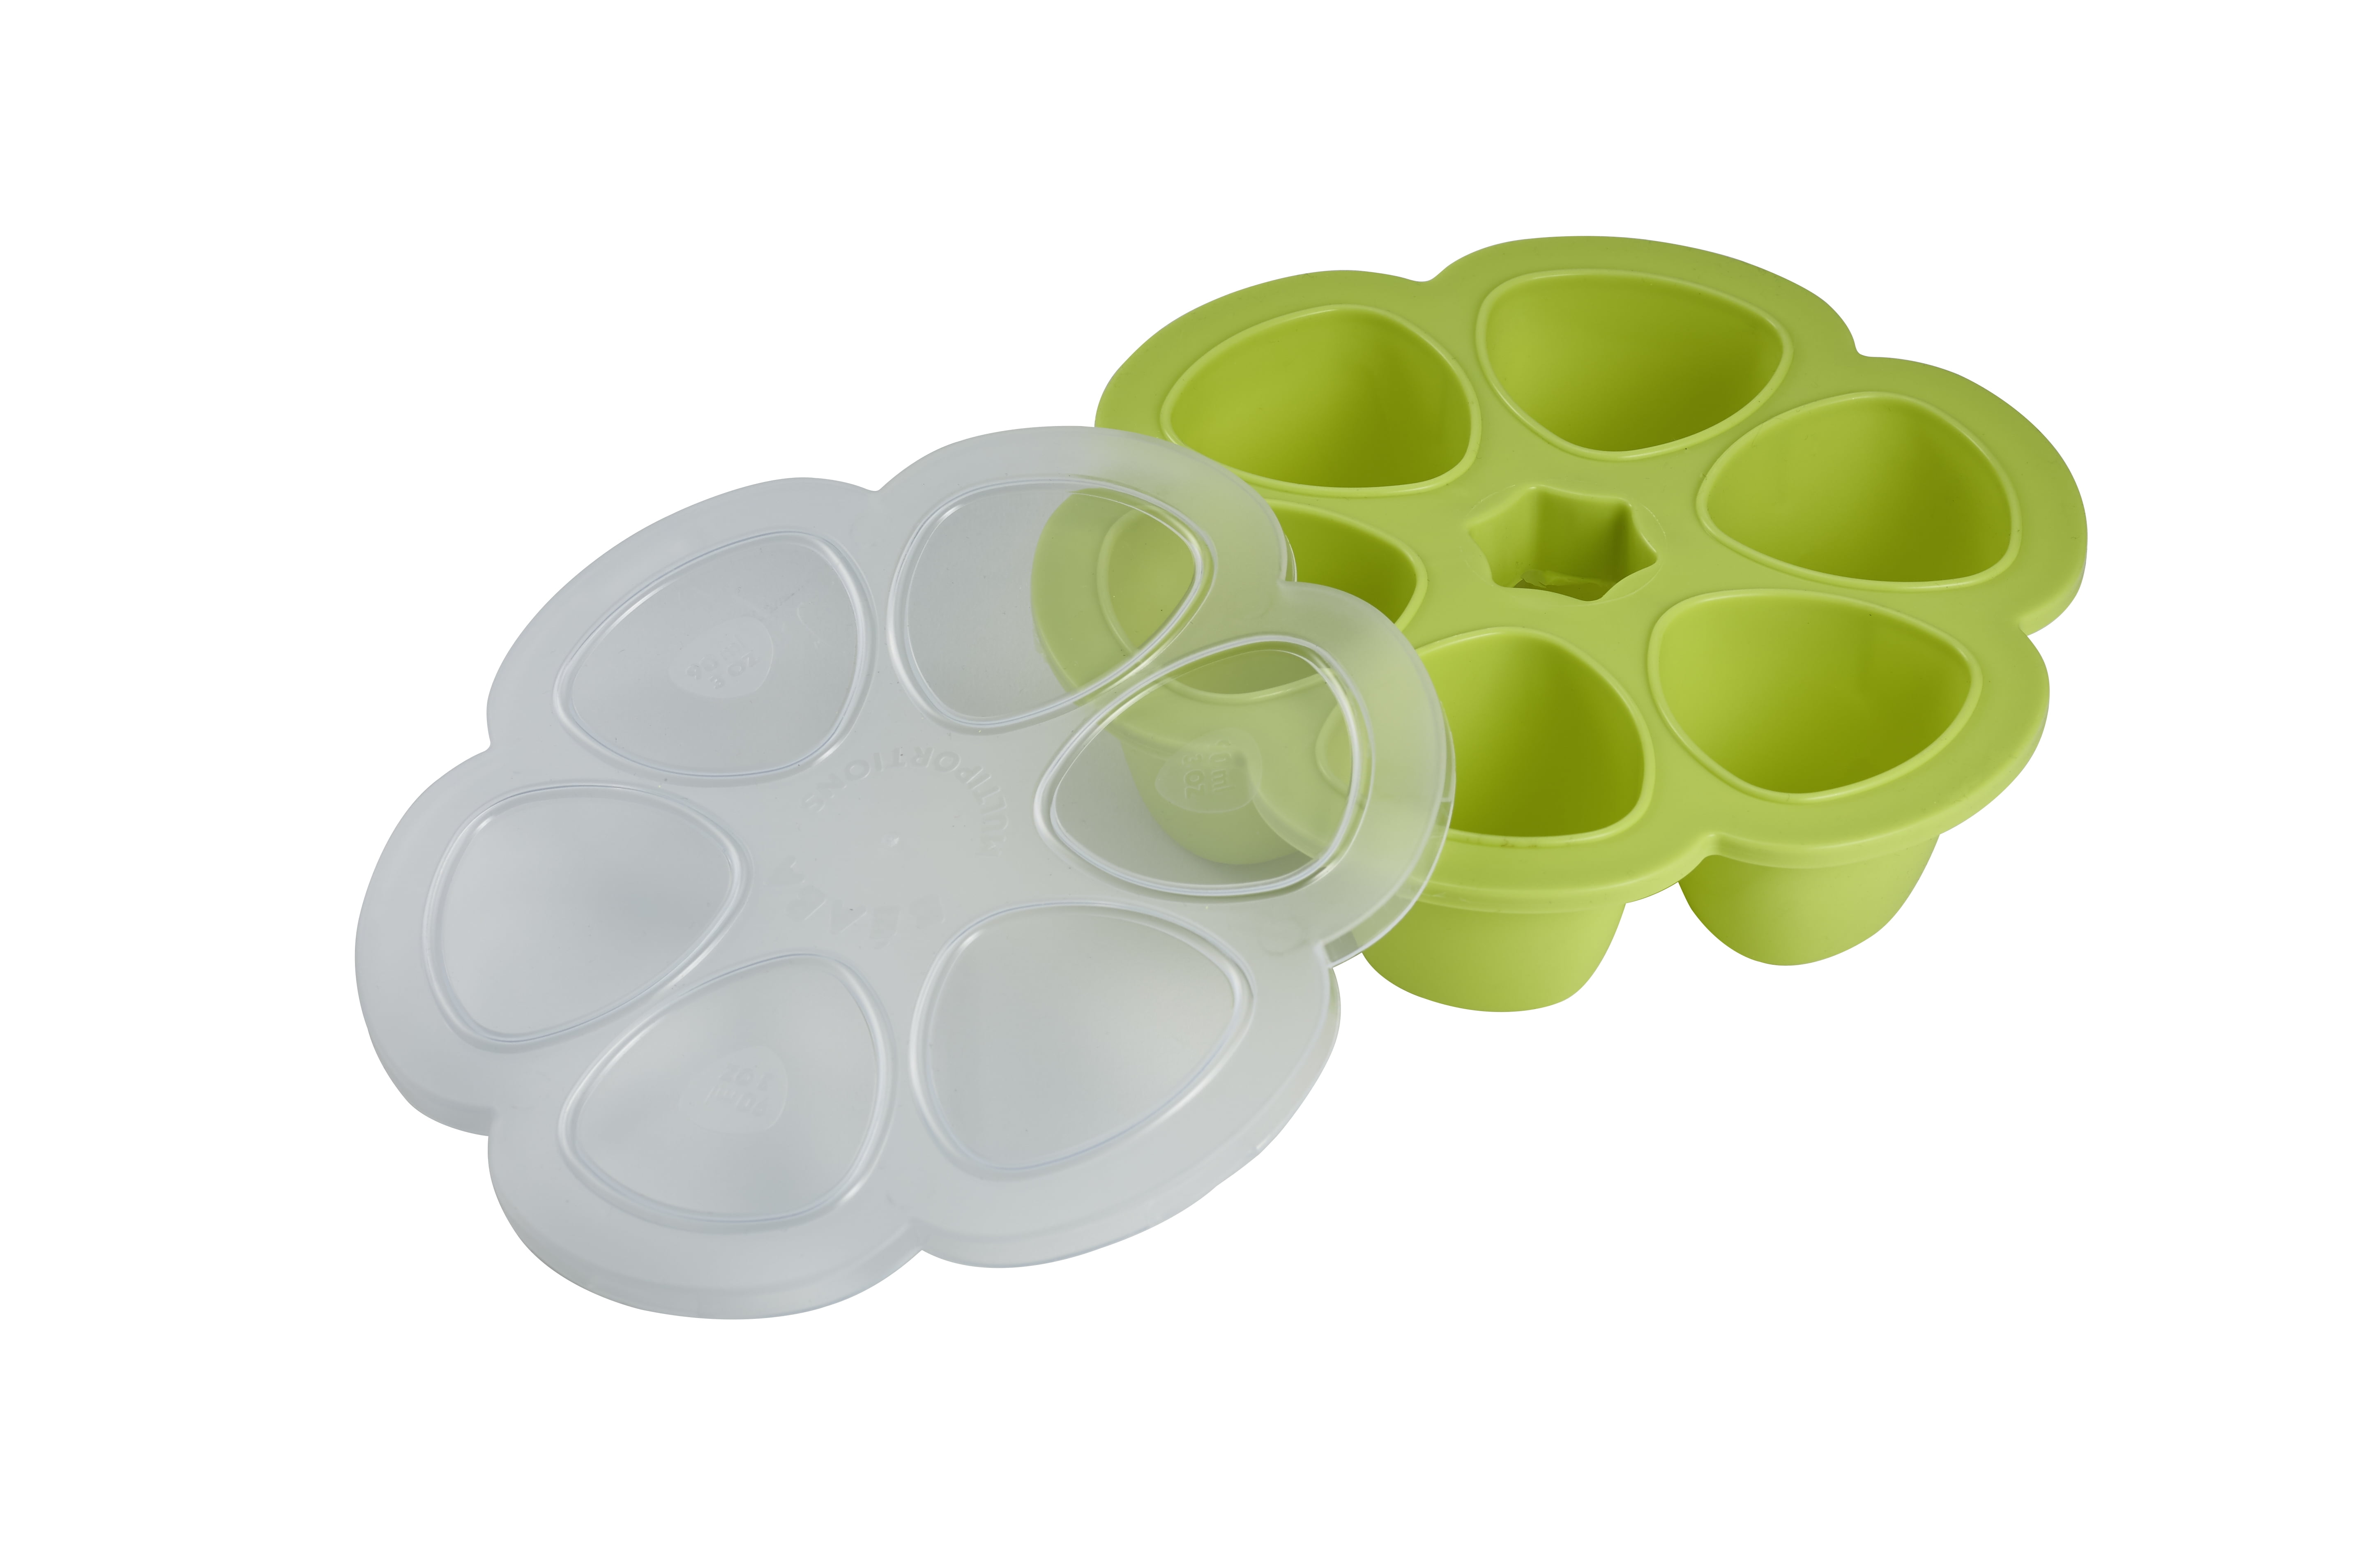 BEABA Silicone Multiportions Baby Food Tray, Oven Safe, Made in Italy, –  Buttercup